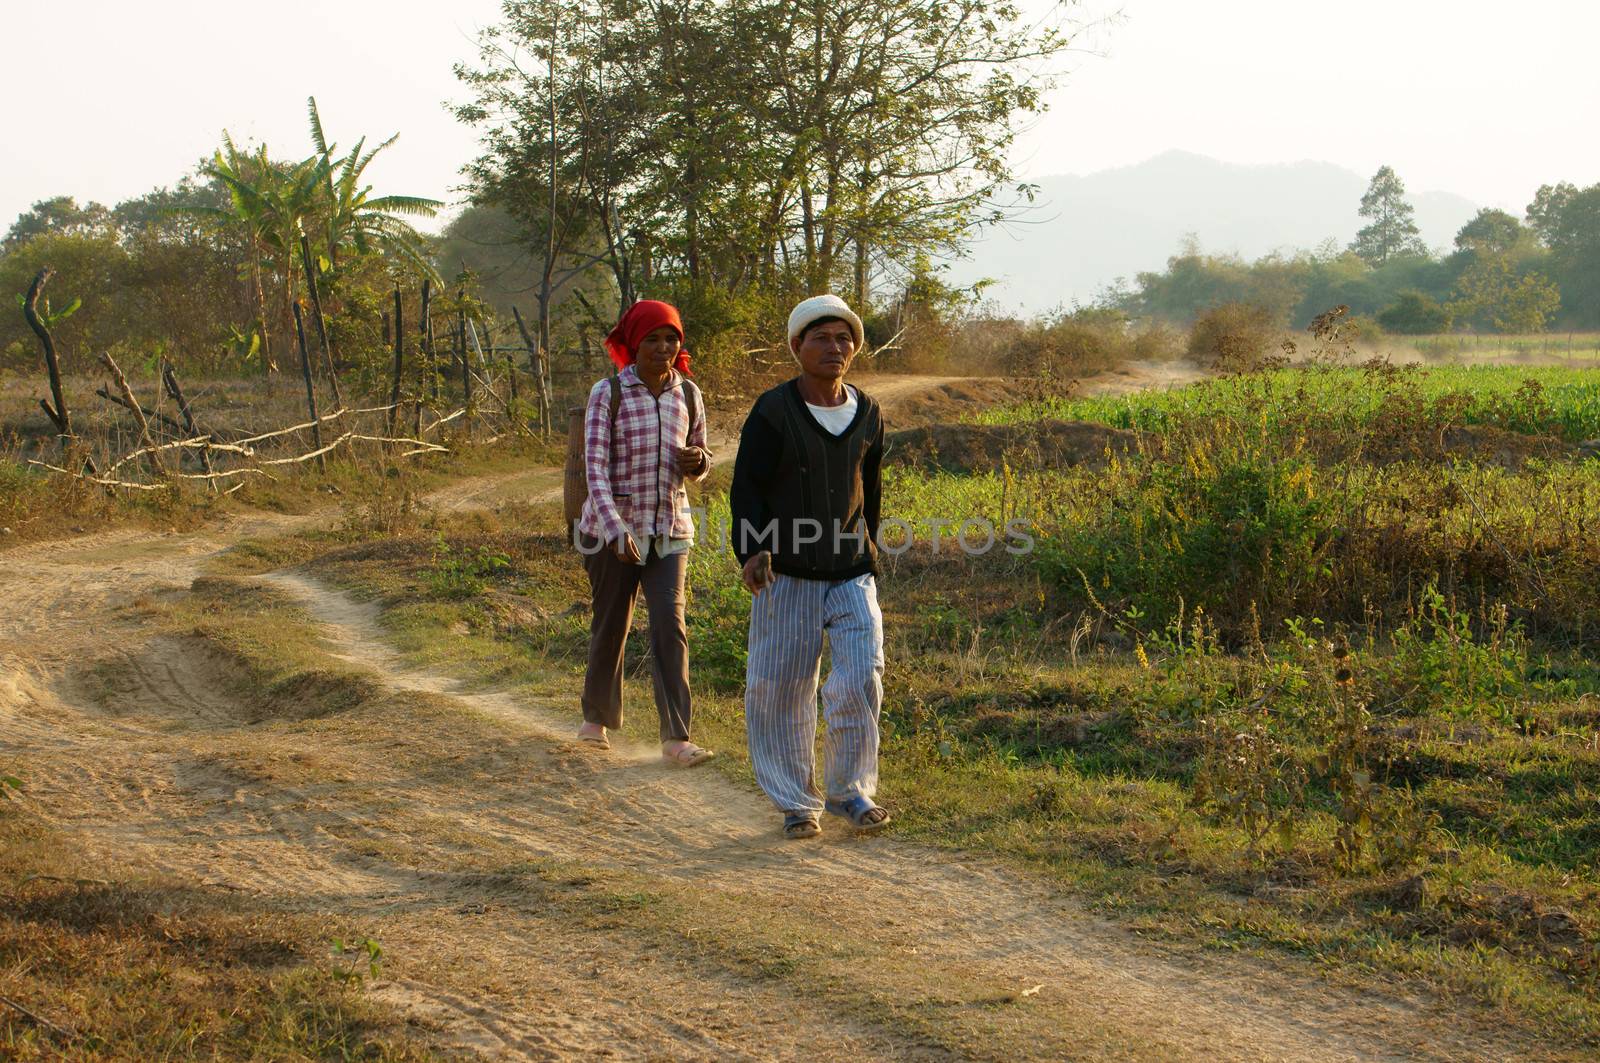 DAKLAK, VIETNAM- FEB 7: Couple of farmer walking on path at countryside to coming home, they walk on dust track in evening make calm view, Viet Nam, Feb 7, 2014